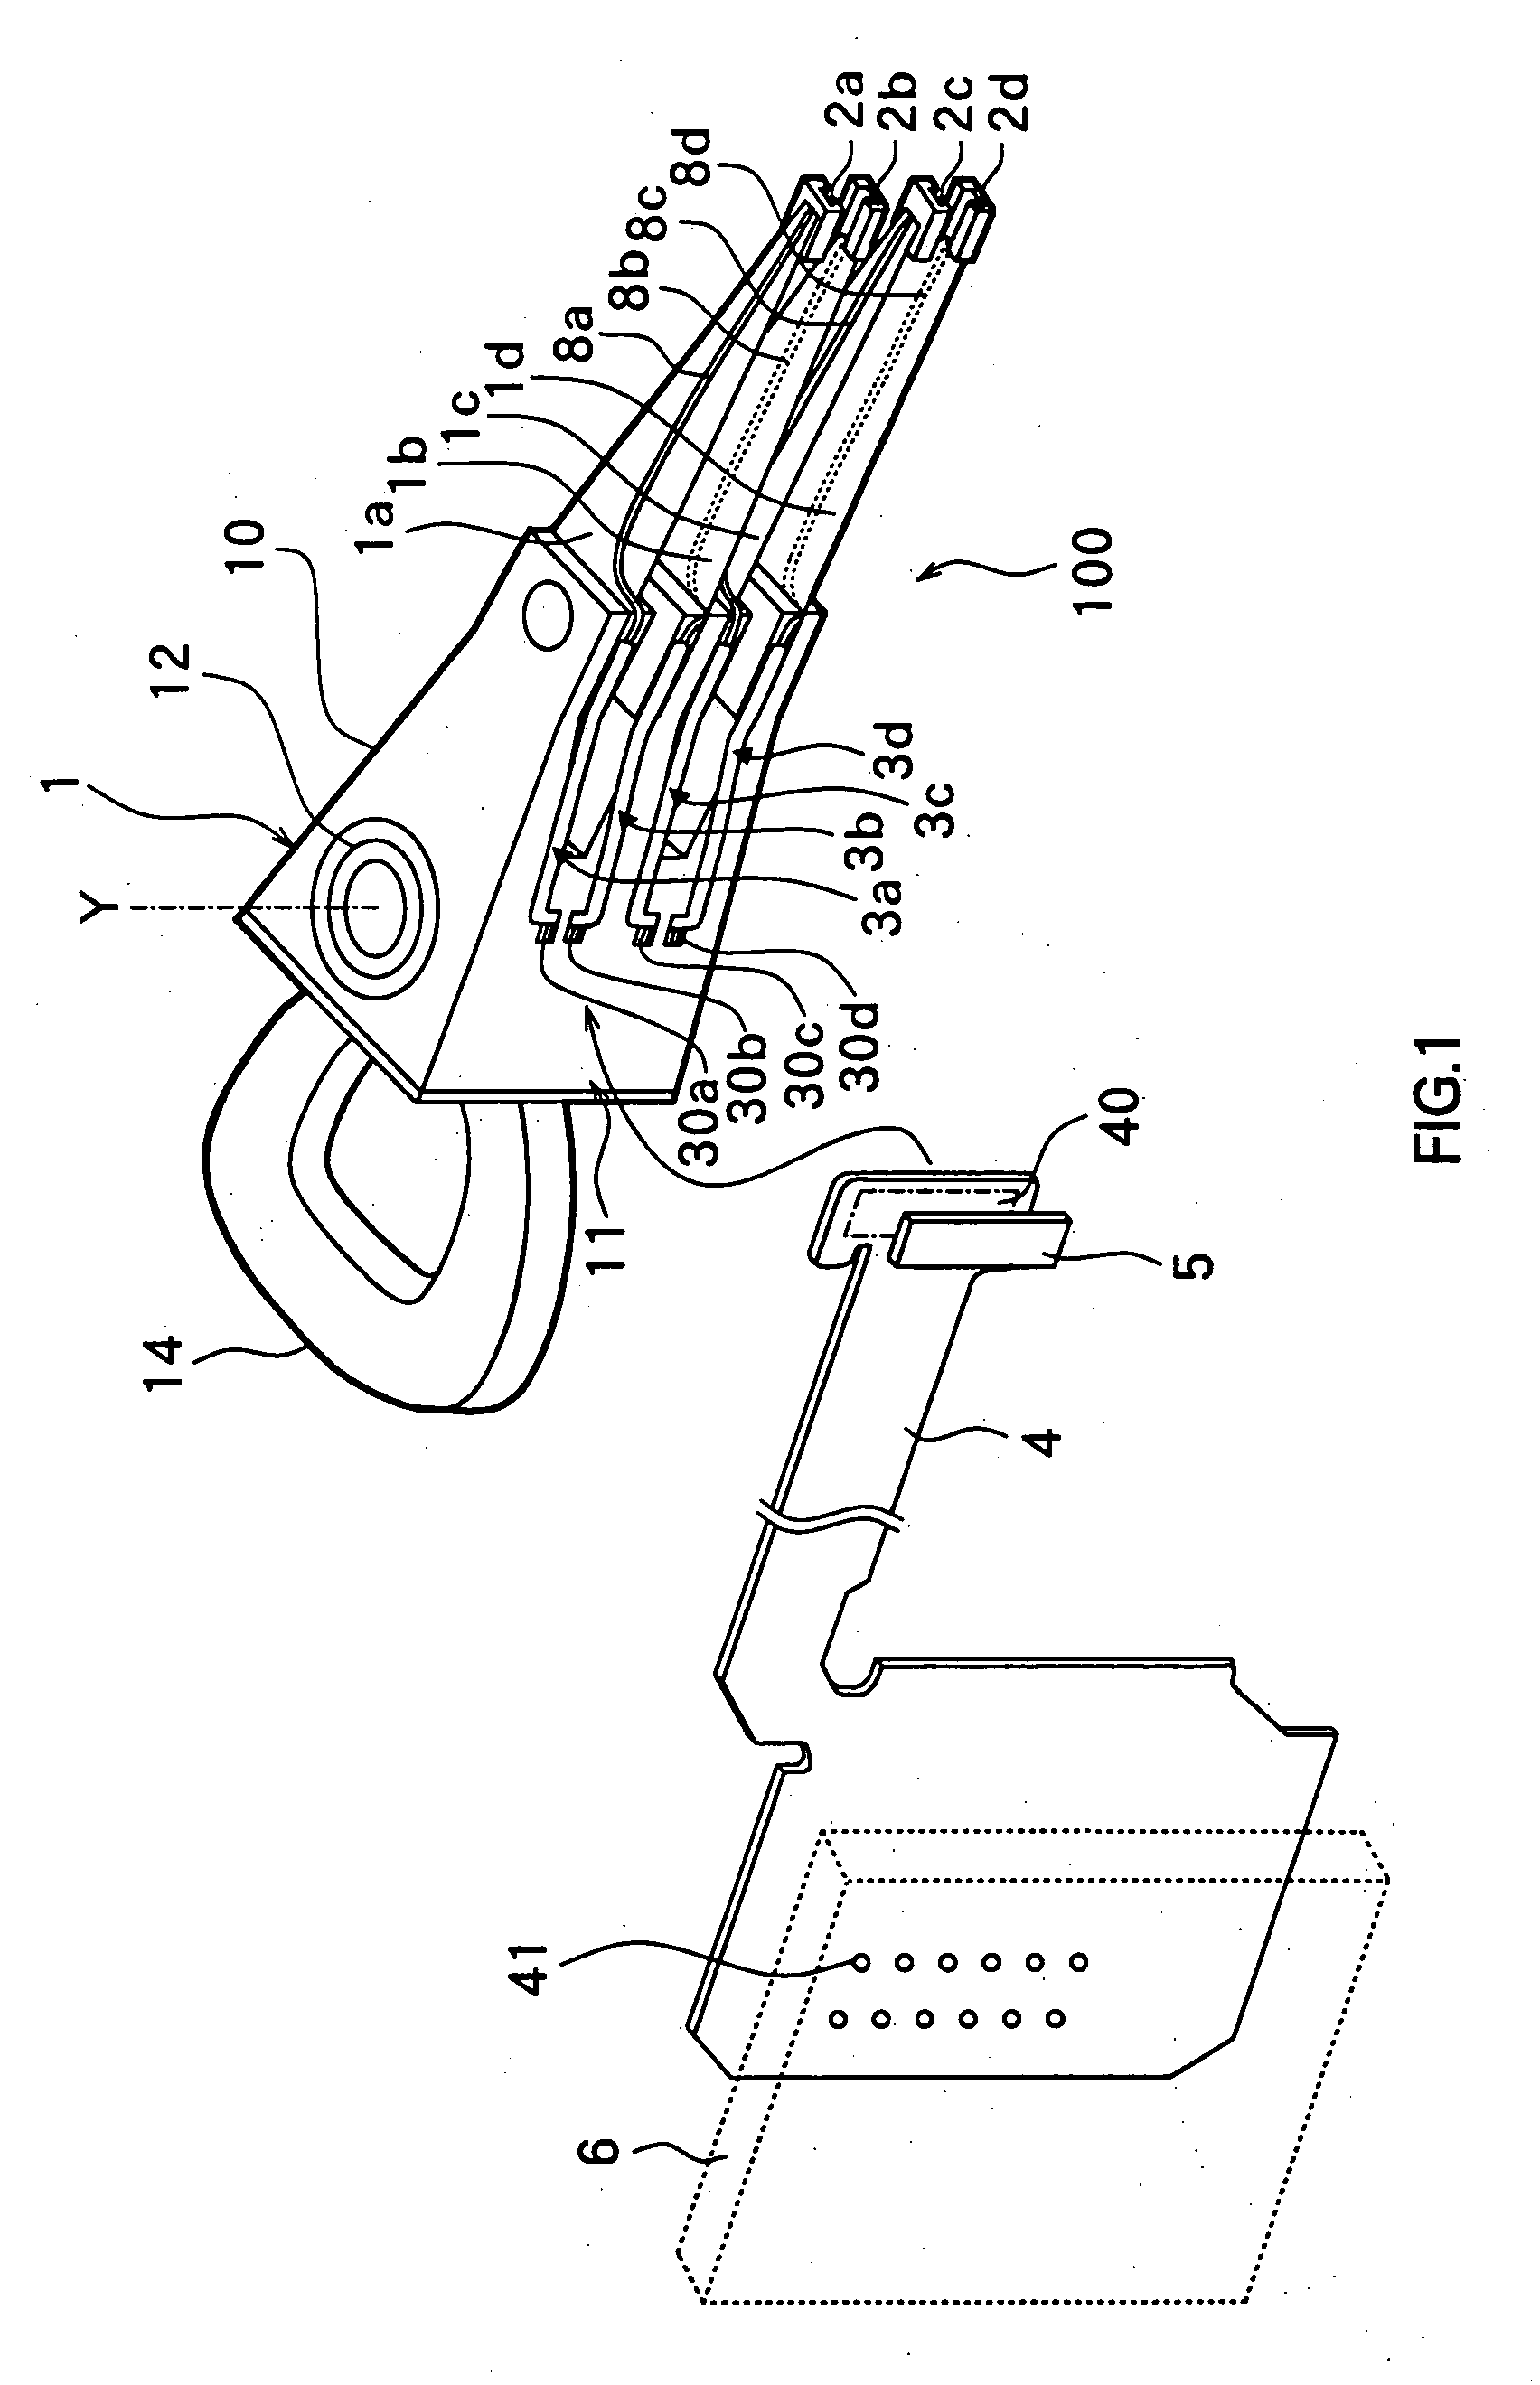 Magnetic head assembly having a rotational arm for electrically connecting the magnetic head to an external circuit and methods of manufacturing the same